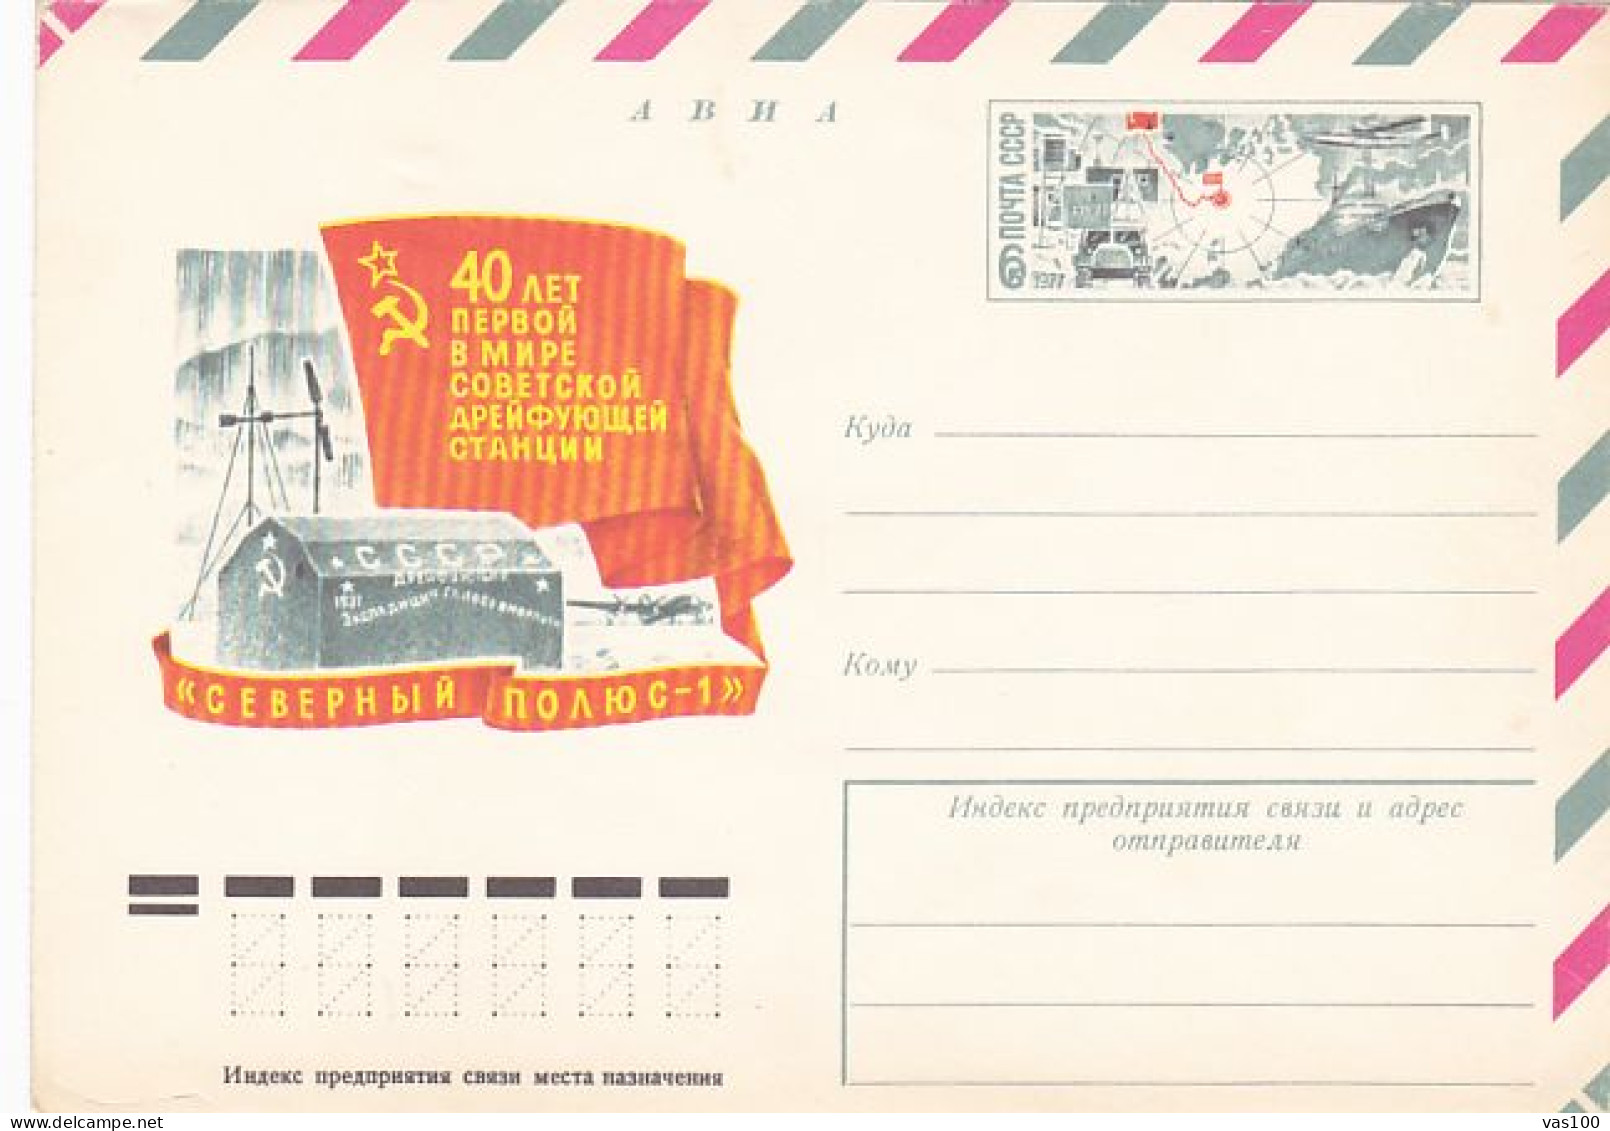 NORTH POLE, RUSSIAN NORTH POLE 1 REASERCH STATION, COVER STATIONERY, ENTIER POSTAL, 1977, RUSSIA - Scientific Stations & Arctic Drifting Stations